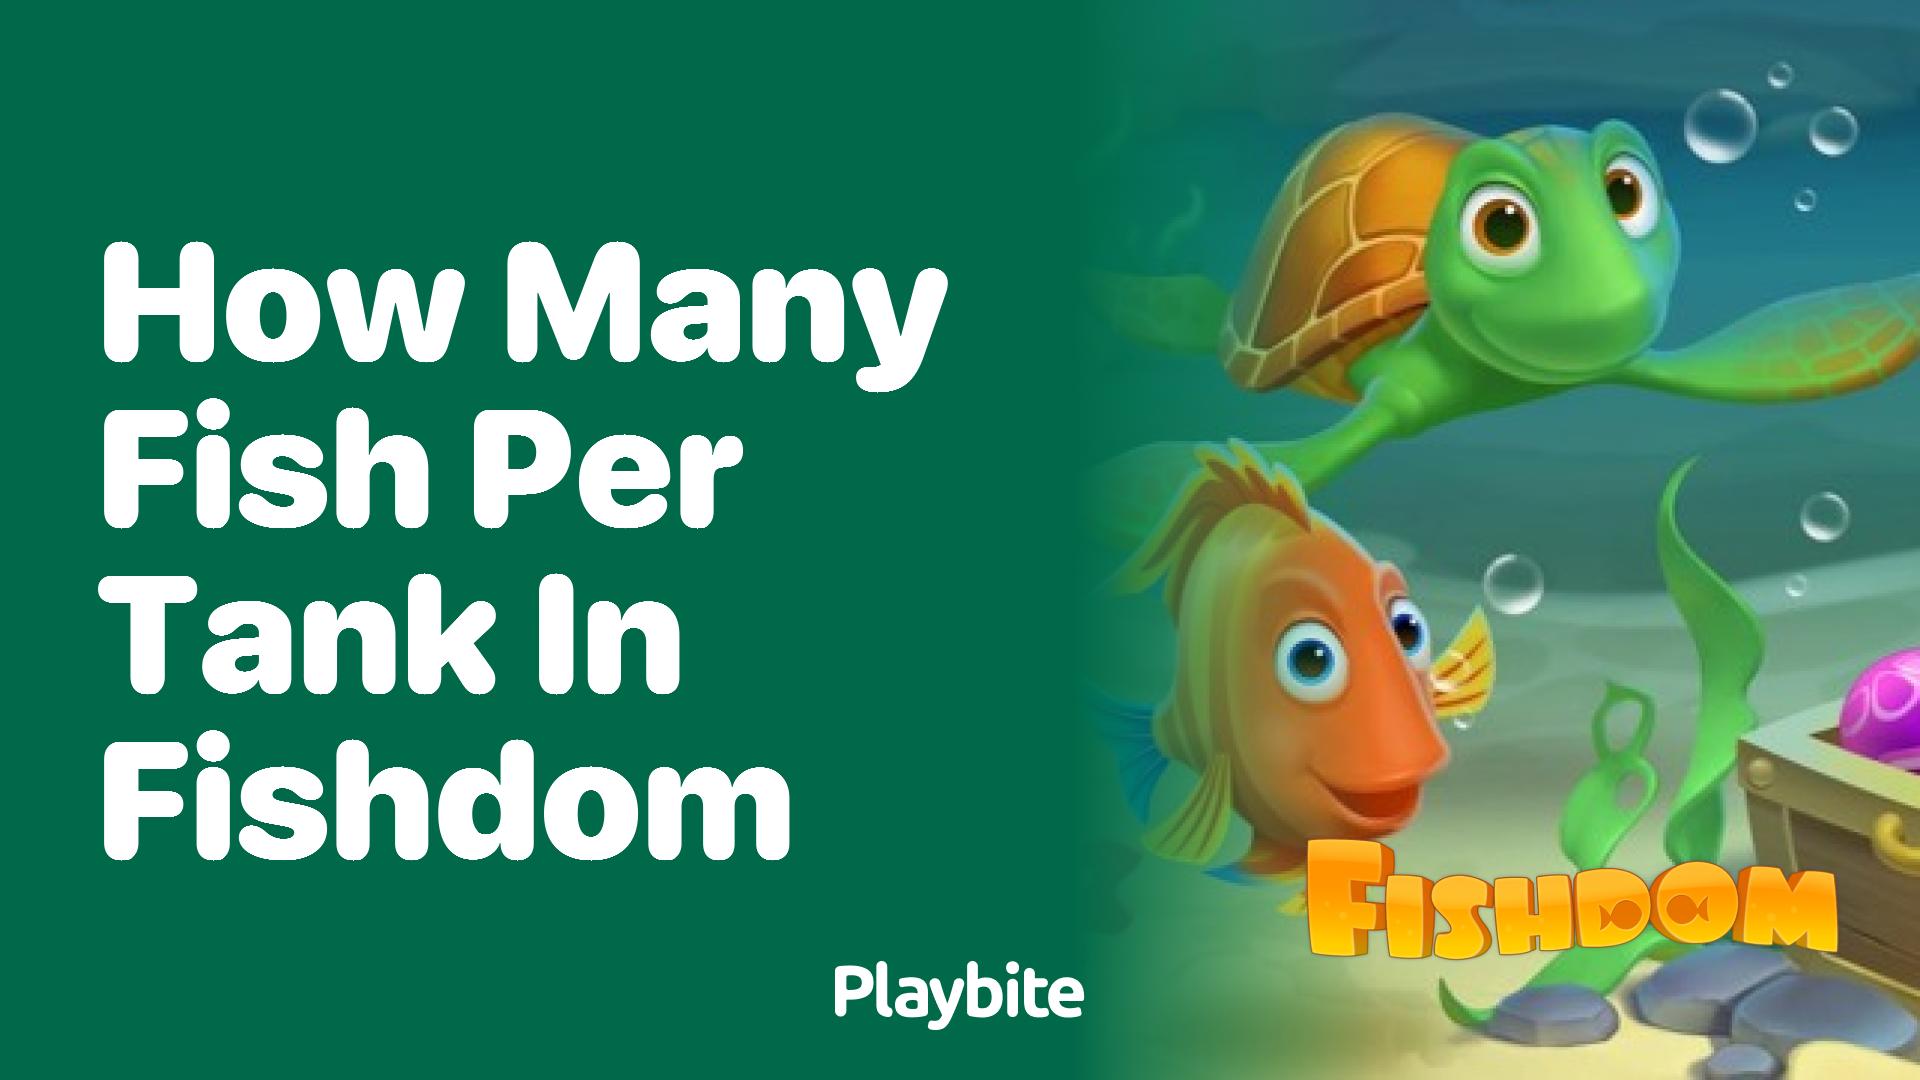 How Many Fish Can You Have Per Tank in Fishdom?